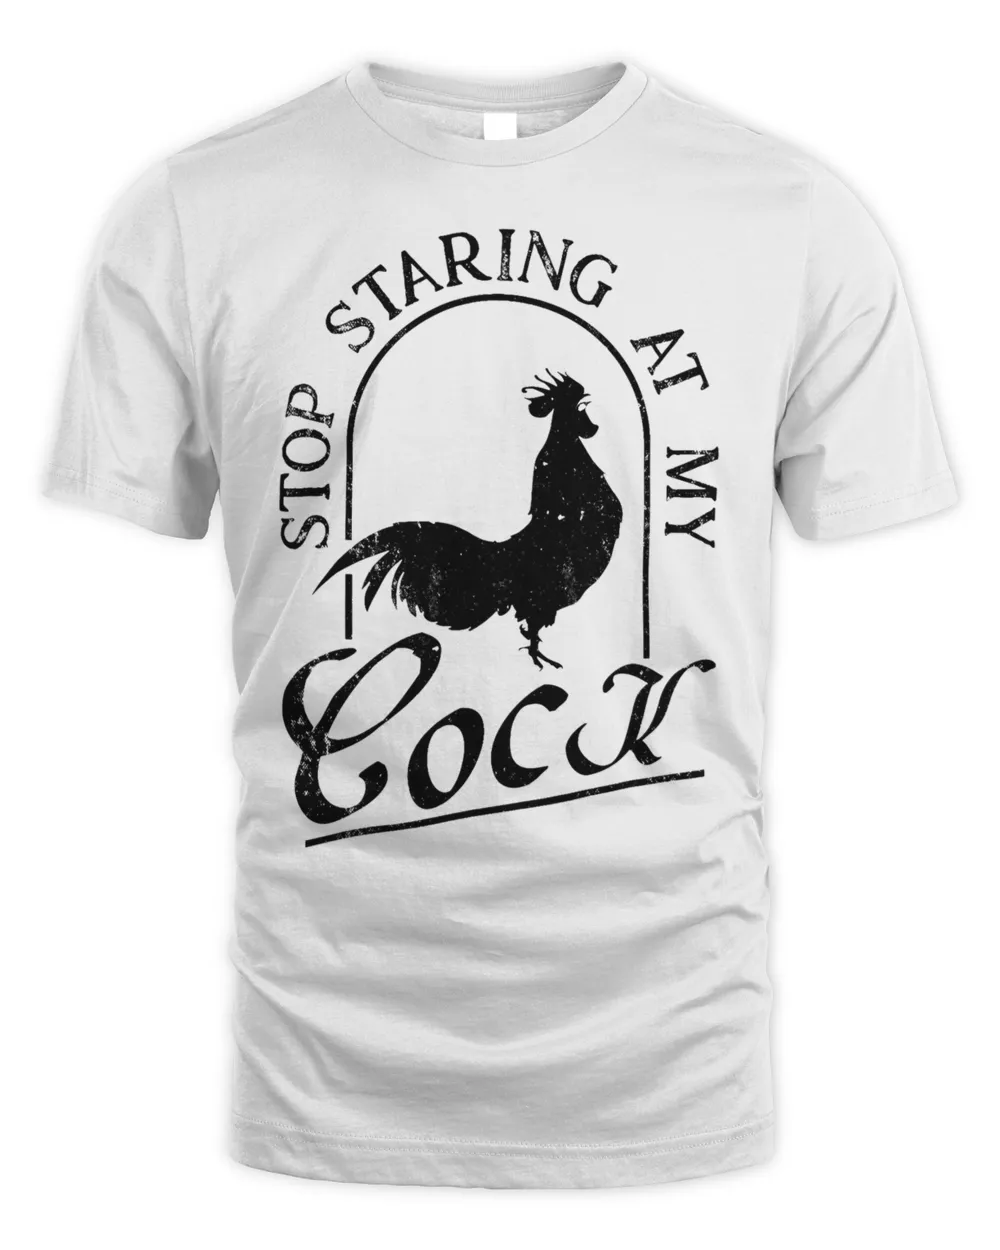 Stop Staring At My Cock Funny Rooster Adult Humor Men Women